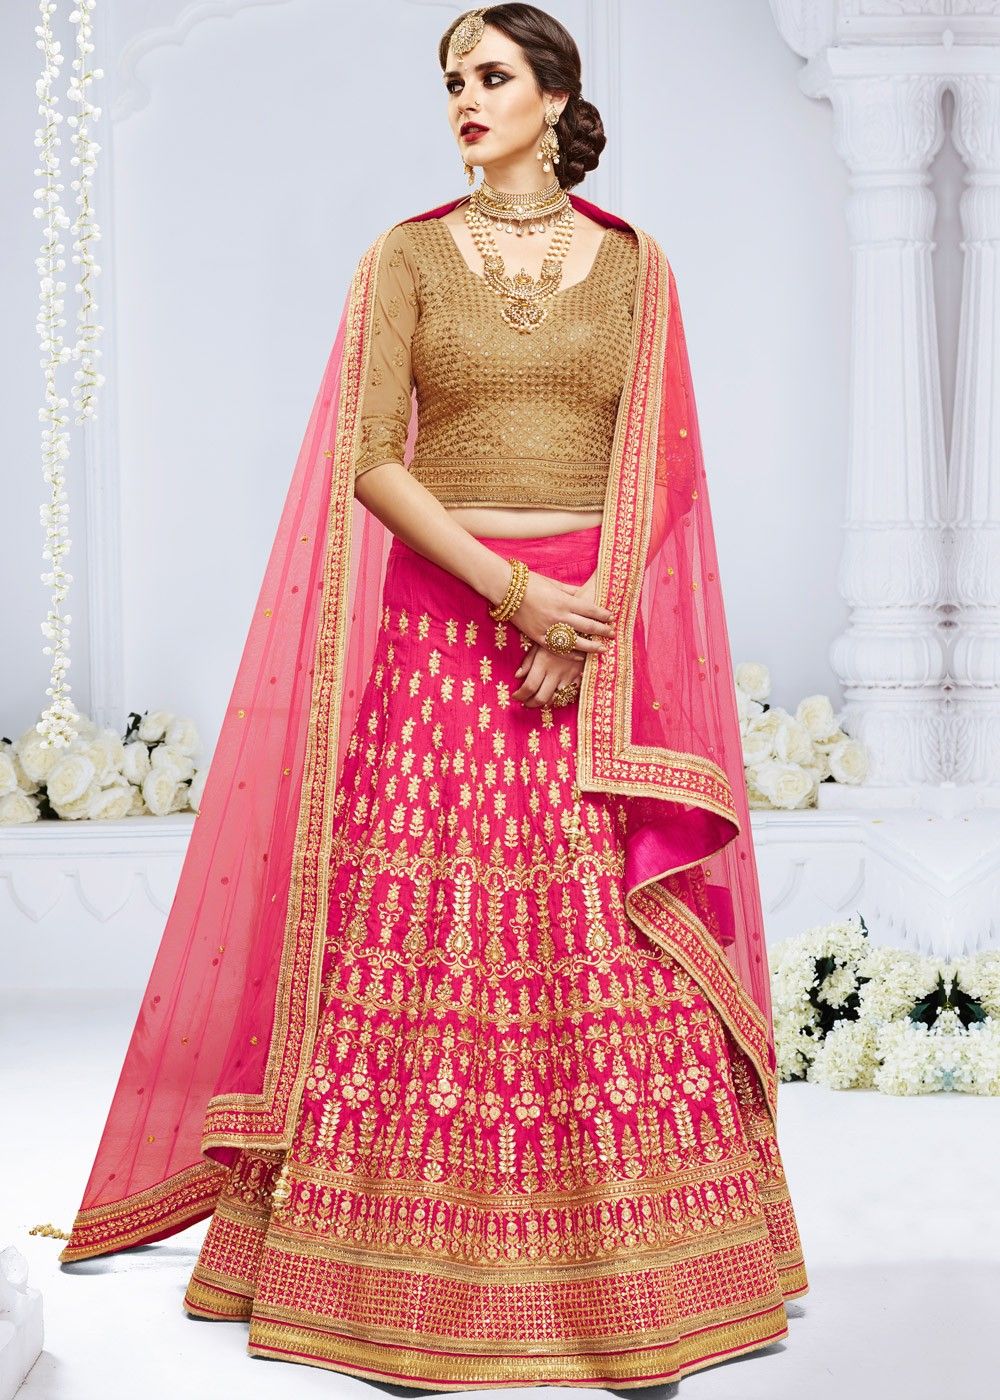 Buy Magenta Pink Lehenga Choli In Raw Silk With Golden Zari And Colorful  Resham Embroidered Morroccan And Floral Border And Buttis Online - Kalki  Fashion